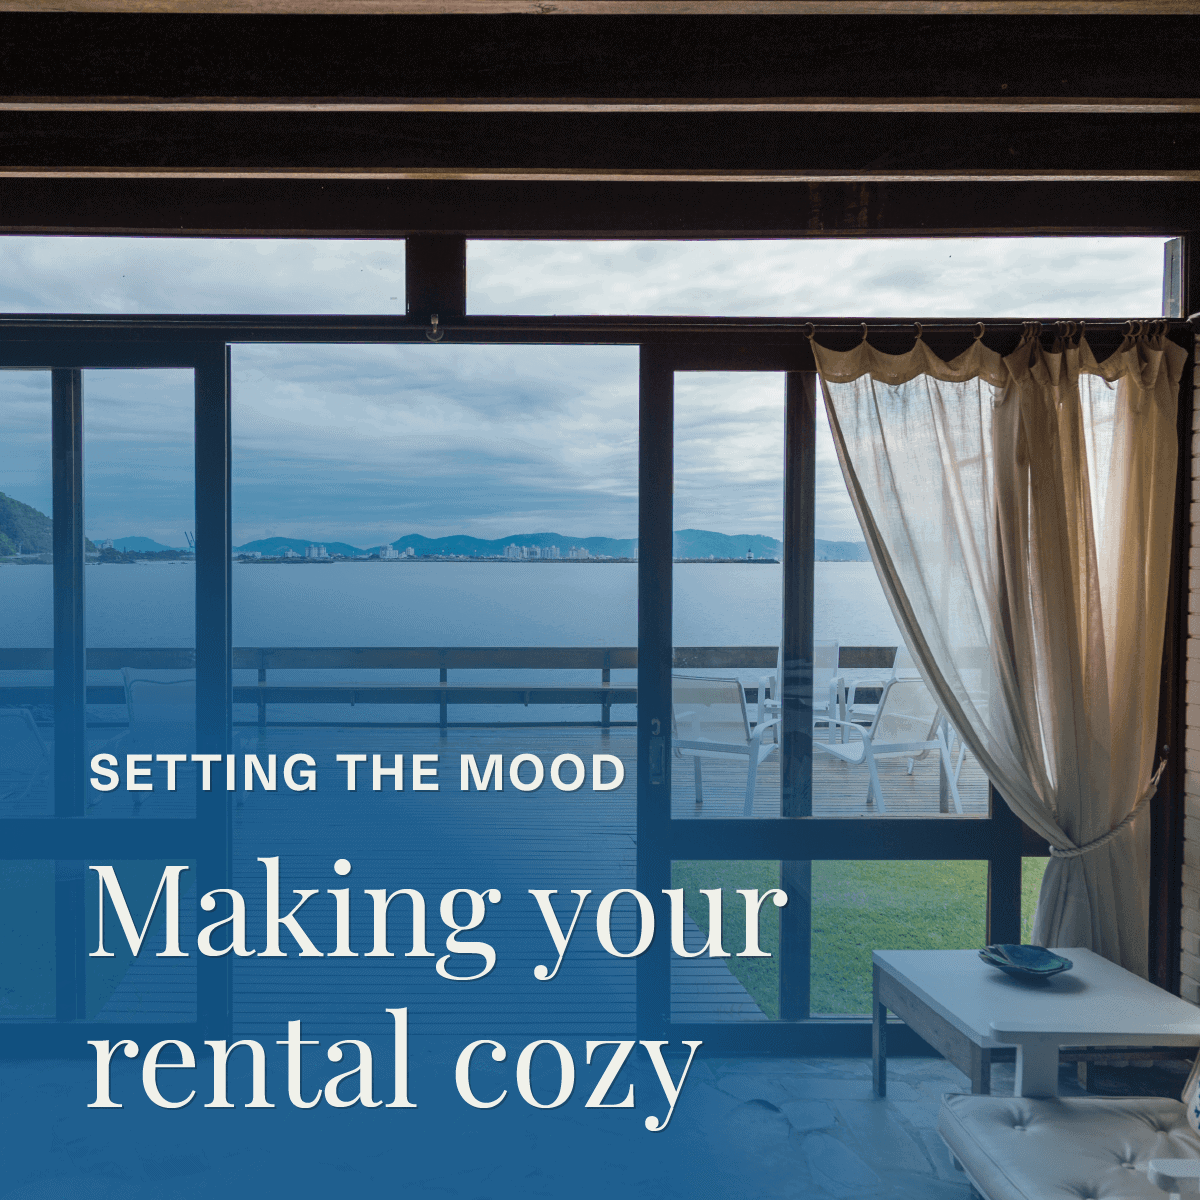 Setting the mood: Making your rental cozy